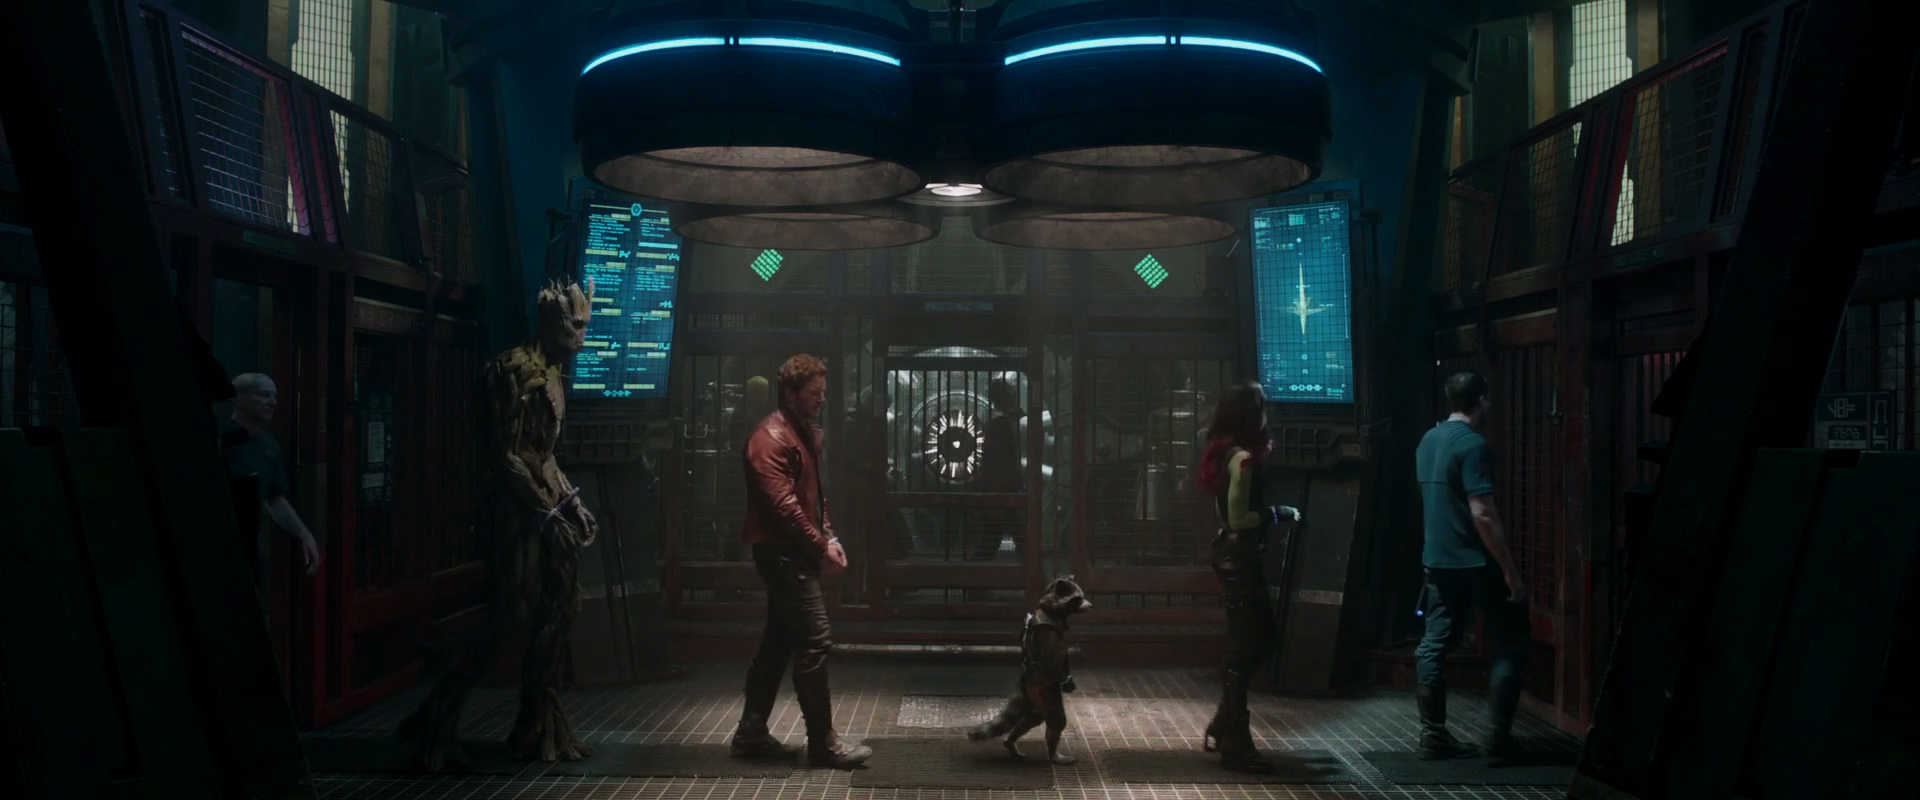 fantastic-trailer-for-guardians-of-the-galaxy-11.jpg